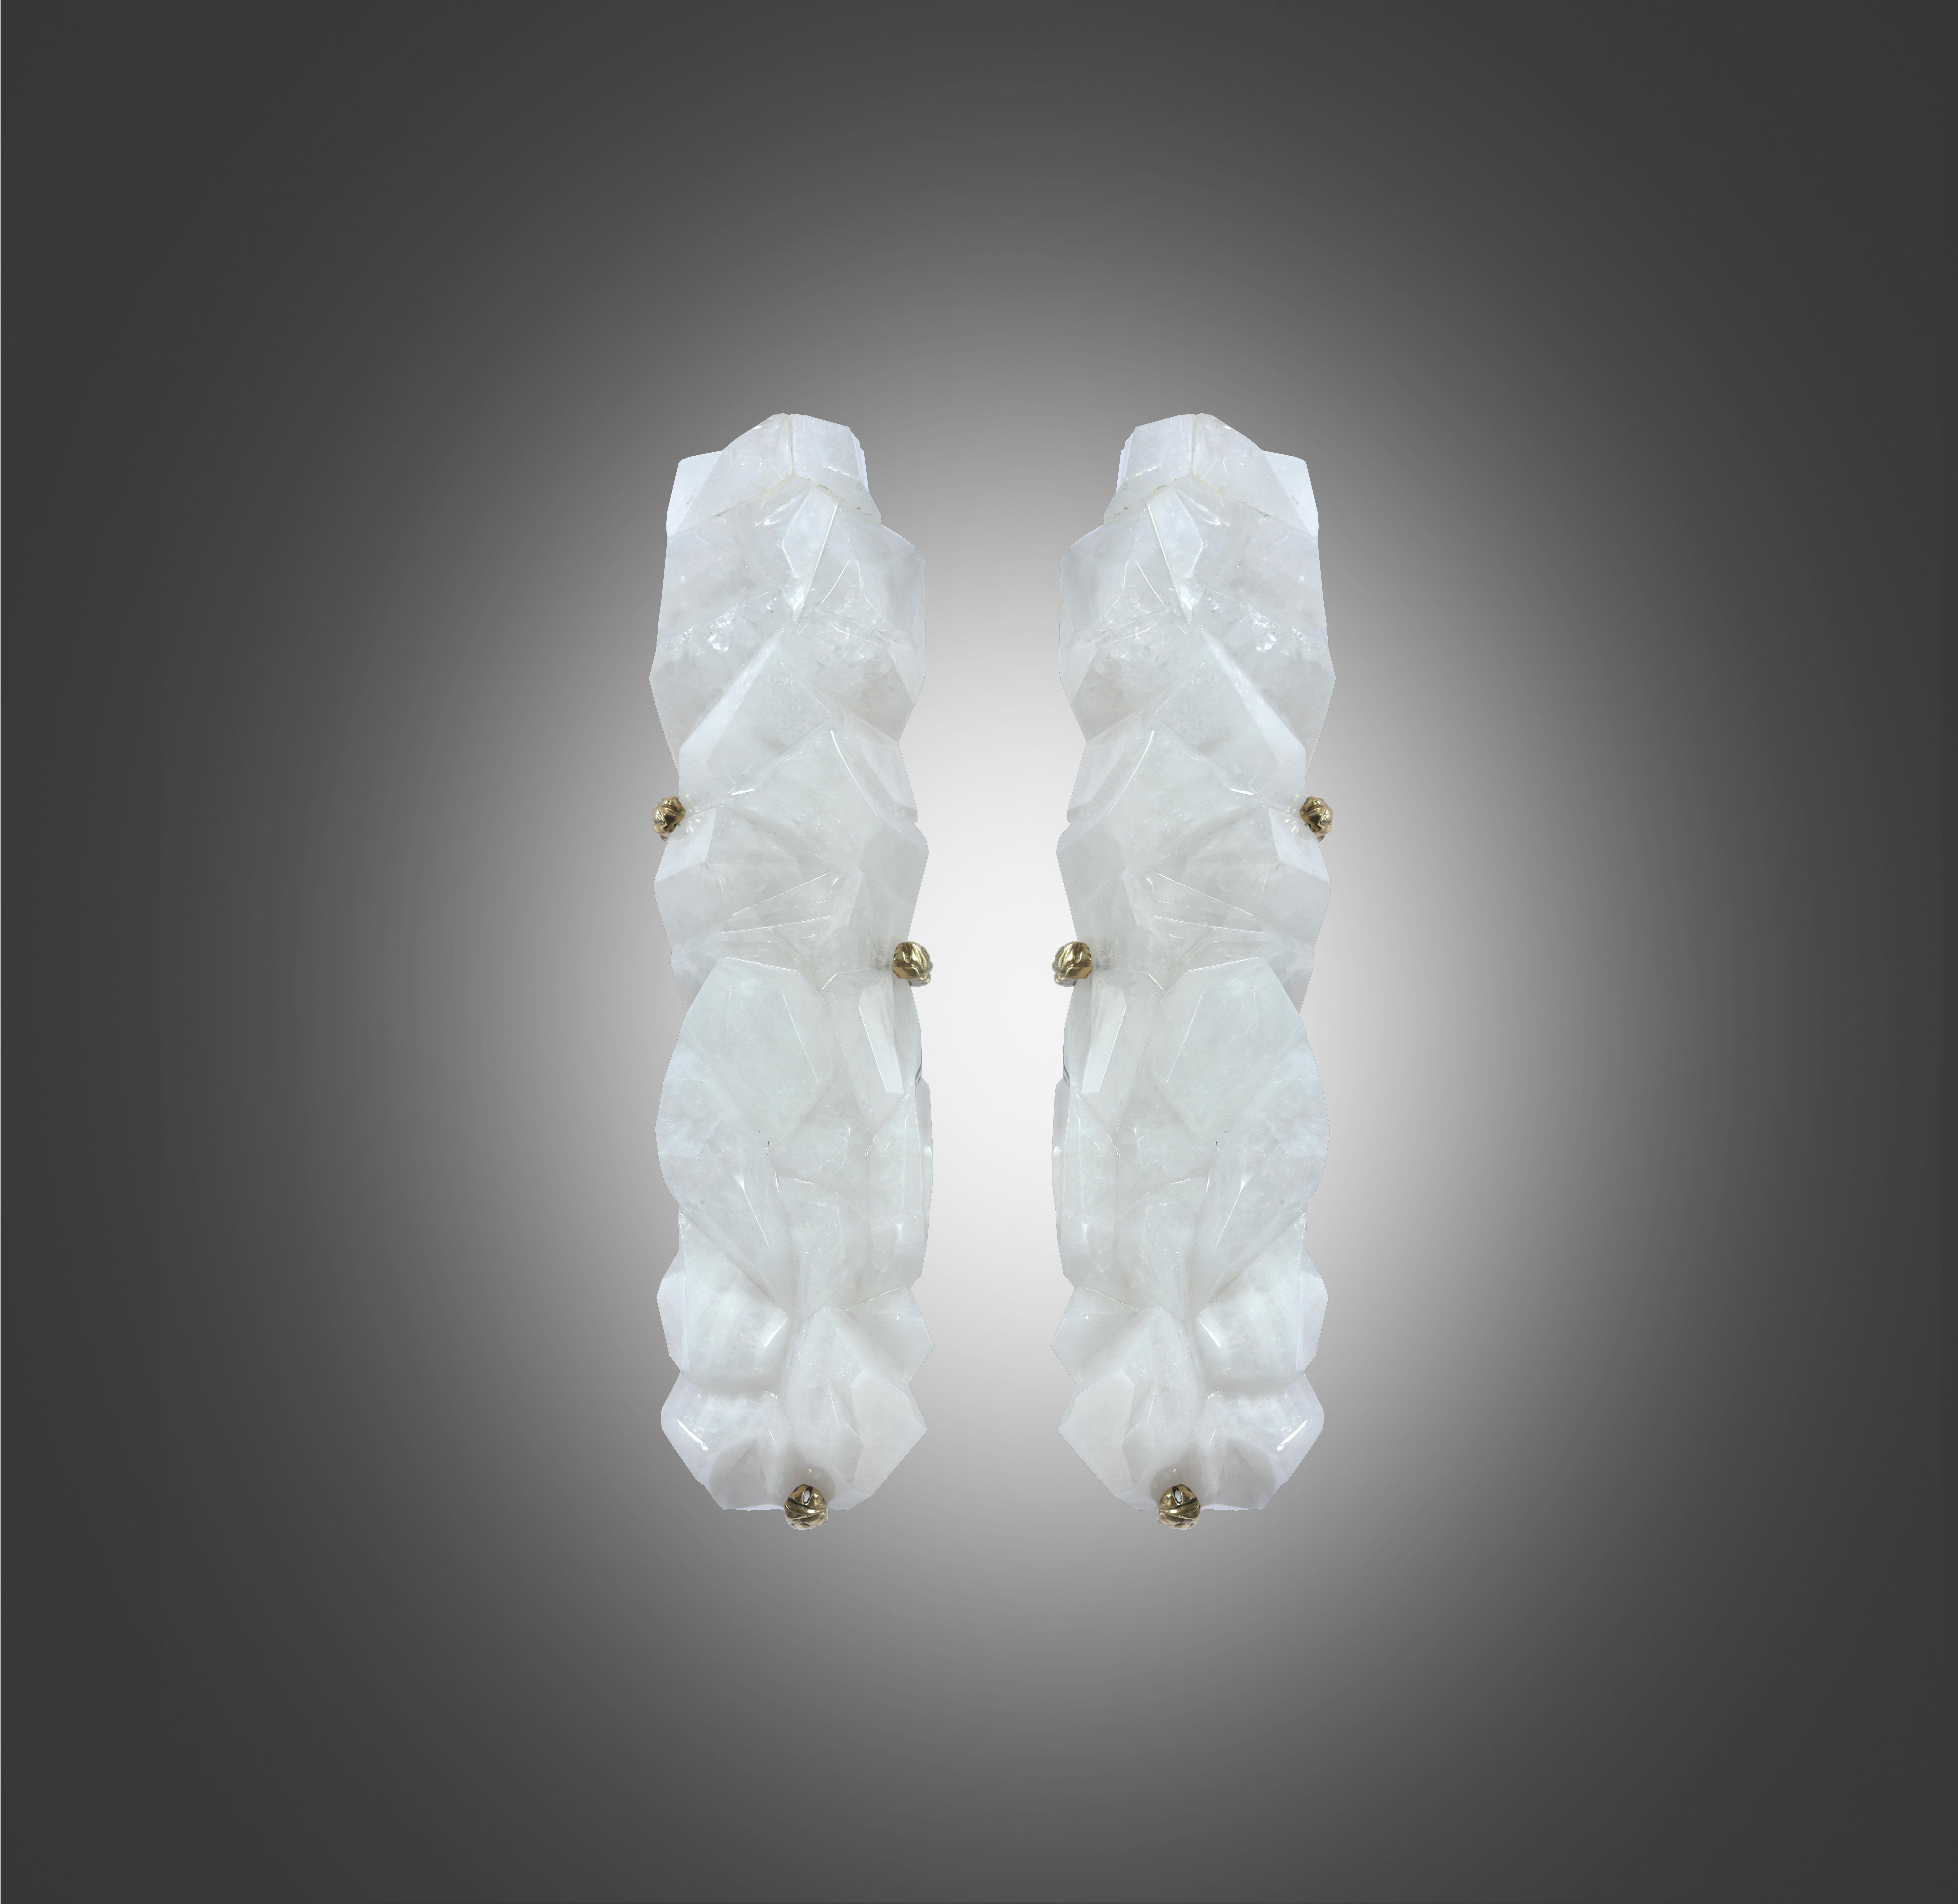 Fine carved multifaceted abstract form rock crystal sconces with polish brass decoration. Created by Phoenix Gallery NYC.
Each wall sconce installed with two sockets, 60 Watts max each socket, total of 120-Watt maximum.
  